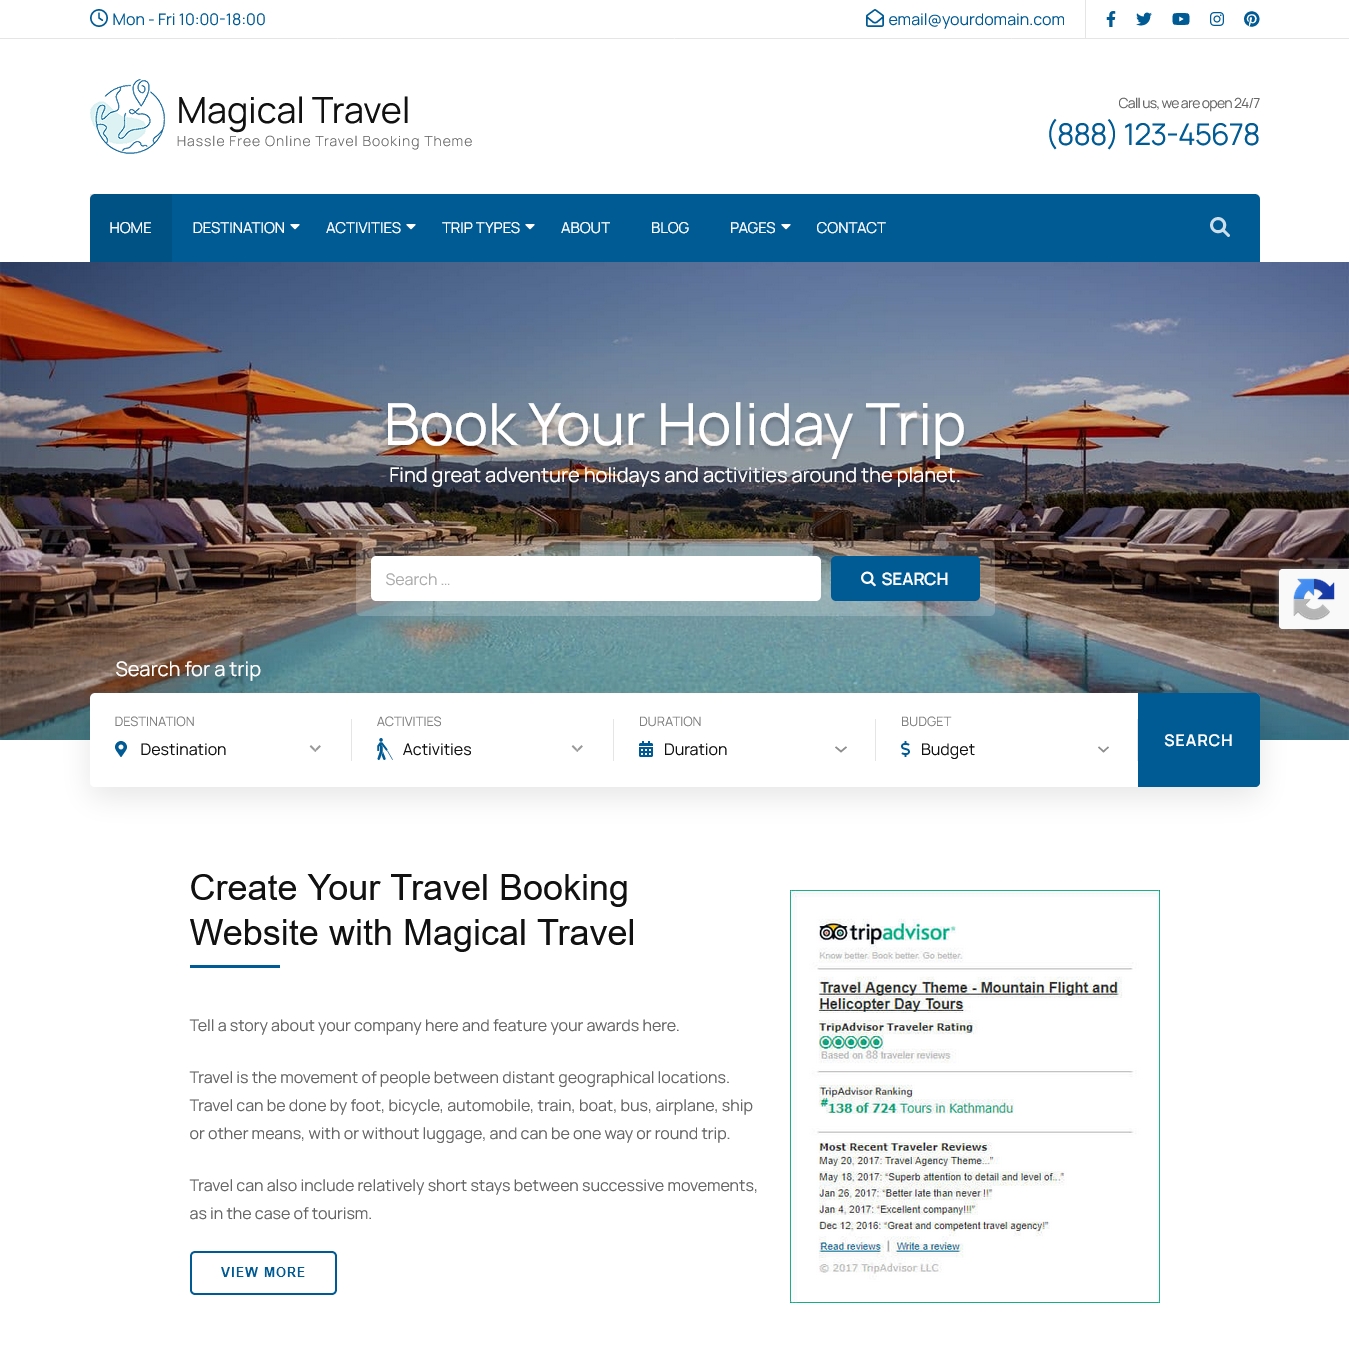 Magical Travel Hassle Free Online Travel Booking Theme